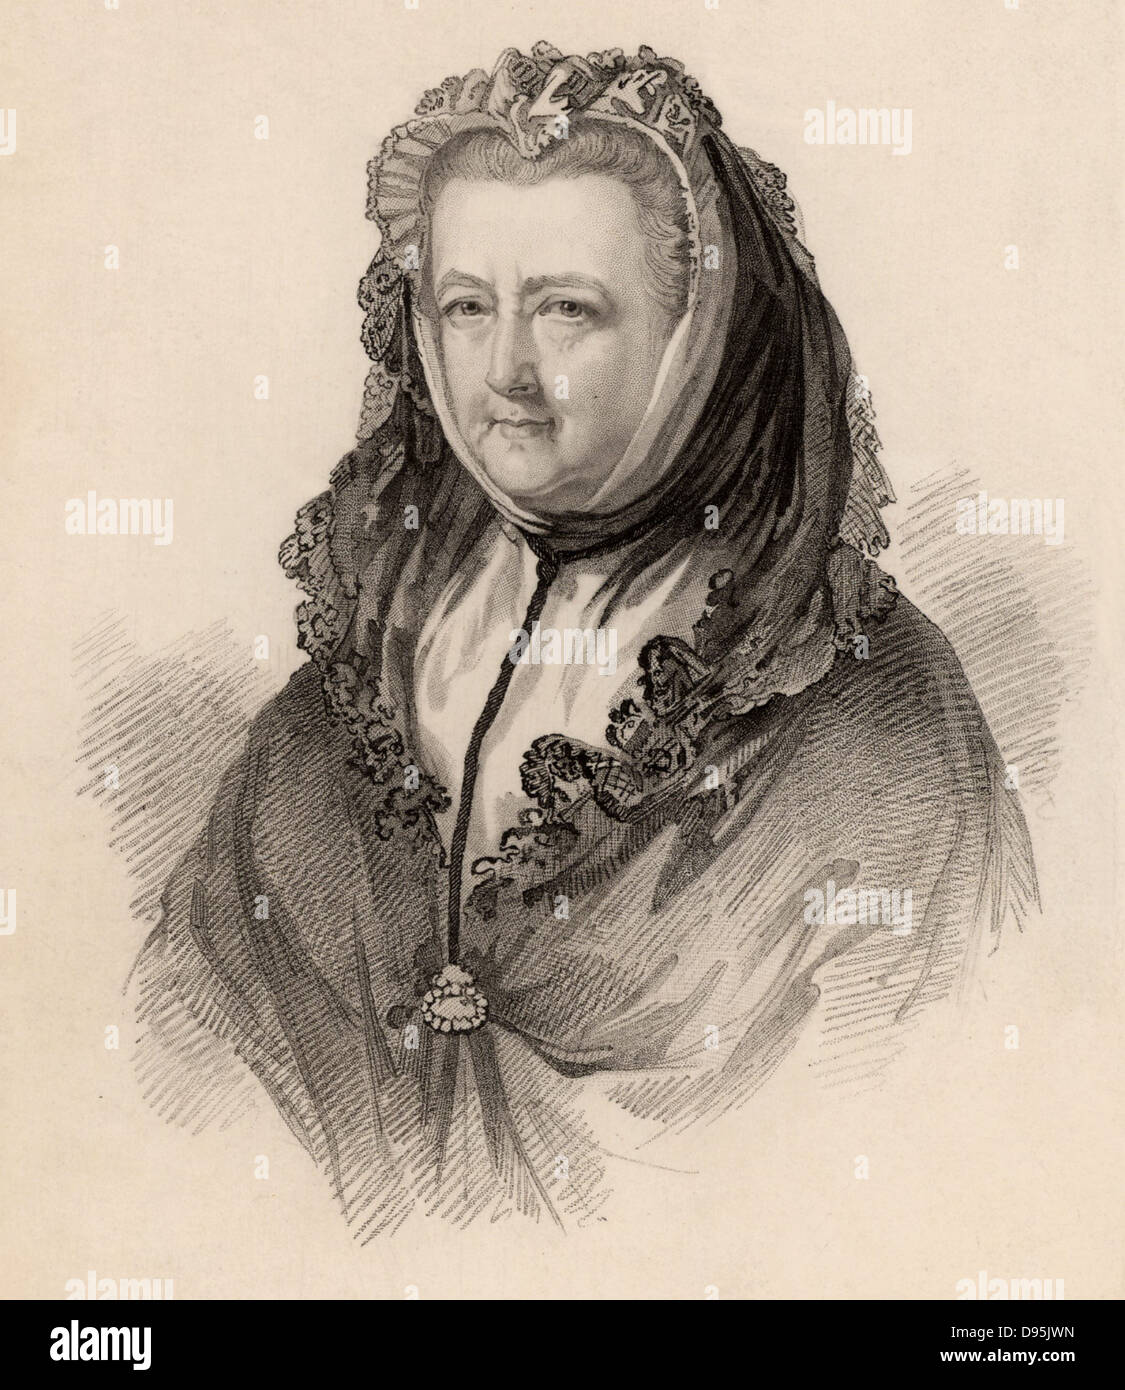 Mary Delany (born Granville 1700-1788) Englishwoman of artistic and literary tastes.  In 1743 she married Patrick Delany, an Irish churchman and friend of Dean Jonathan Swift. She created exquisite paper 'mosaics' (collages), many of which are now in the British Museum.   Engraving from 'Diary and Letters of Madame D'Arblay' by Fanny Burney (London, 1843). Stock Photo